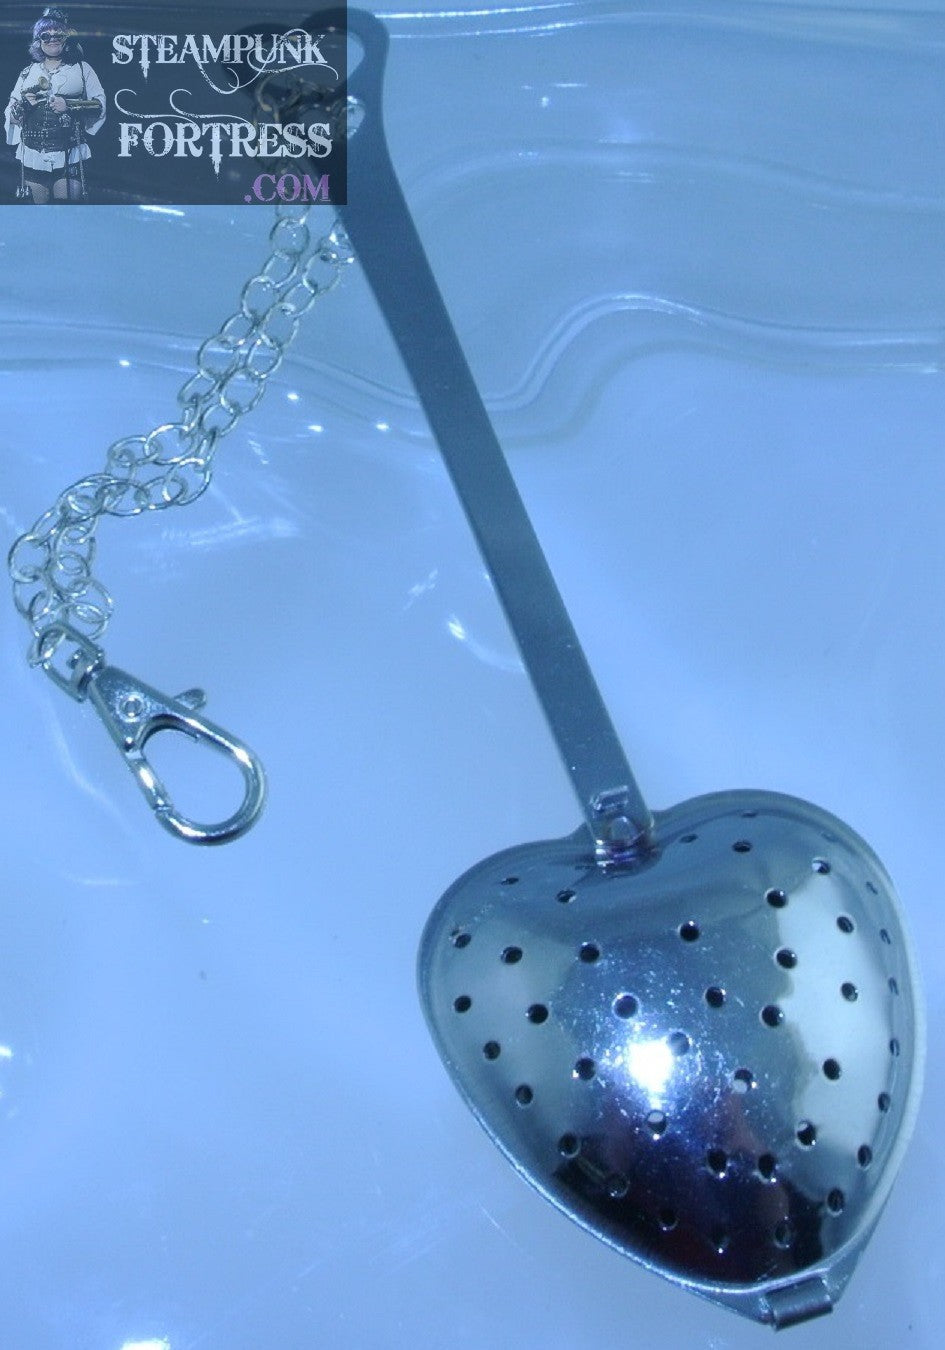 SILVER SPOON STRAINER STIRRER INFUSER HEART SHAPED TEA DUELING CLASP CLIP CHAIN STARR WILDE STEAMPUNK FORTRESS DUPLICATE